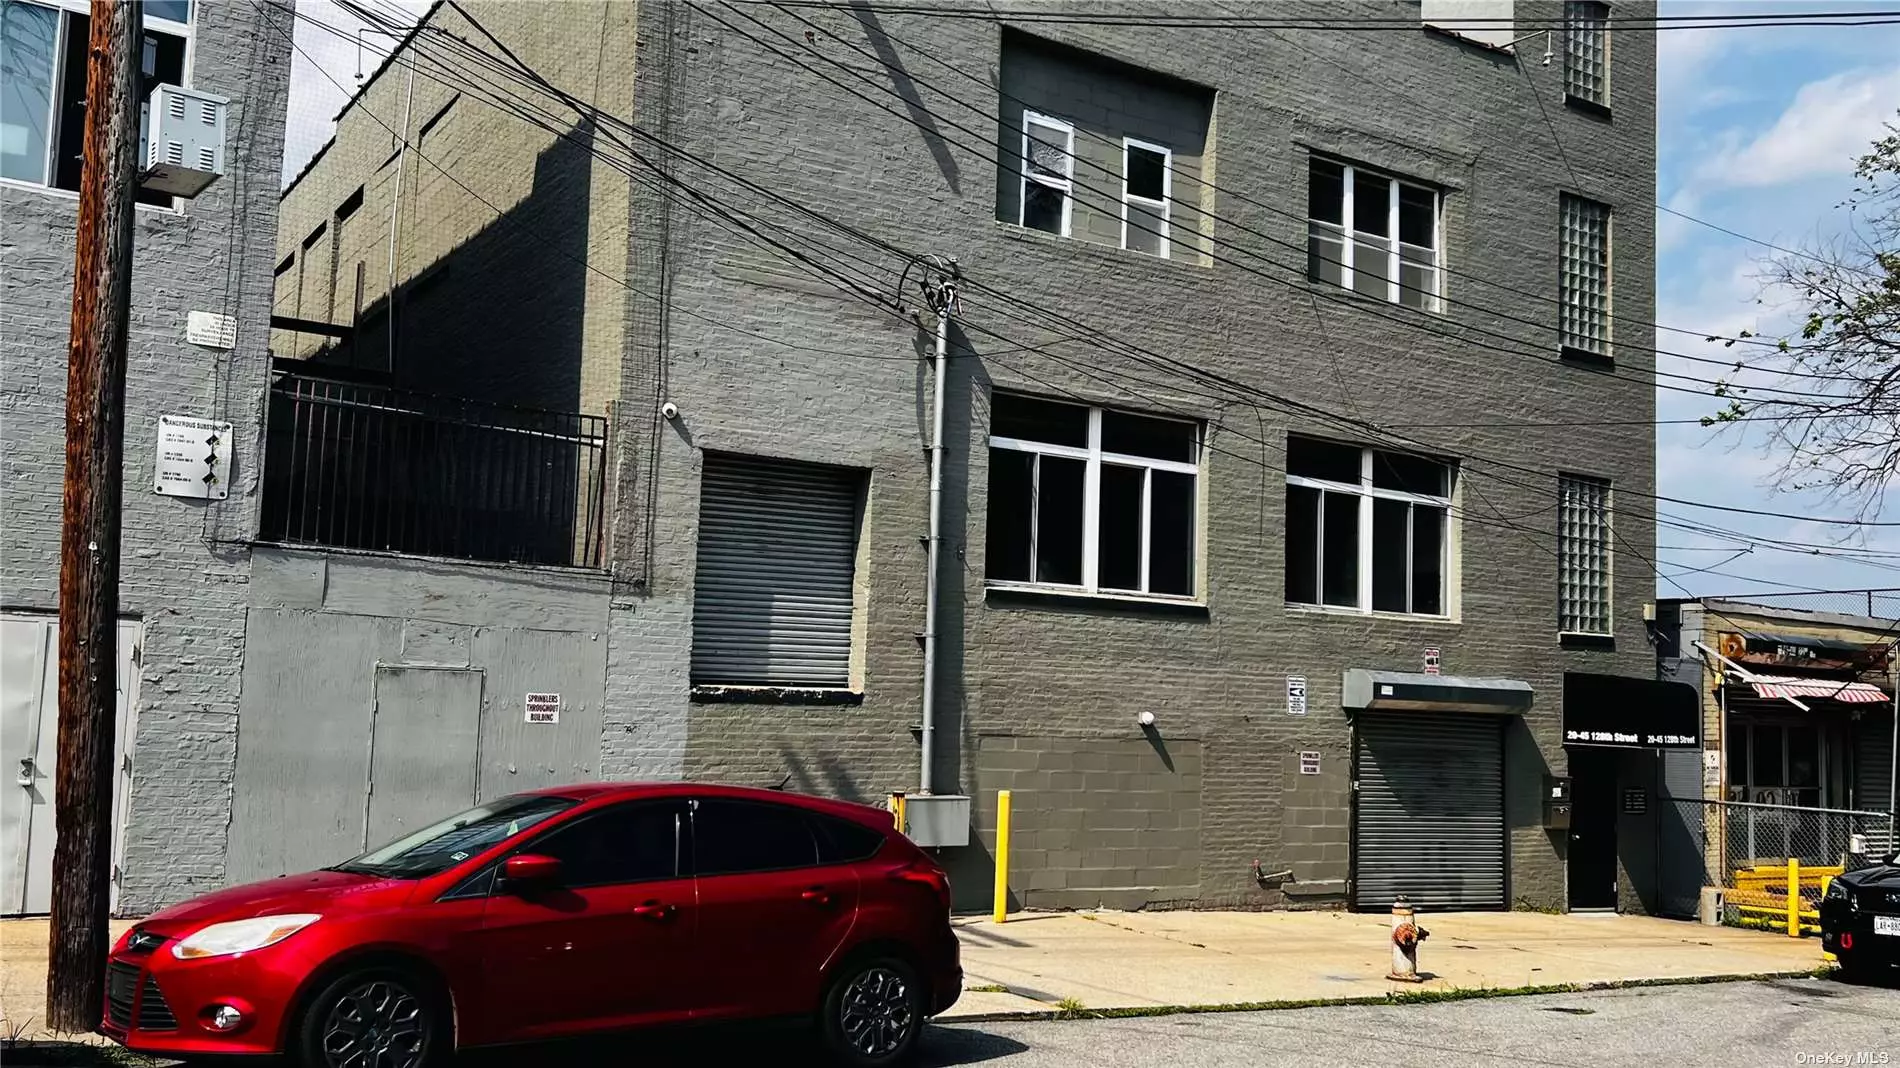 Location ! Location ! 10 mins to downtown flushing warehouse space approx 5000 sqf for rent with 13&rsquo;ceilling heigh overhead roll up door accessible , Bathroom , office room, property tax included , Suitable for office space , showroom or warehouse and so on . owner well maintain it ready mover in ,